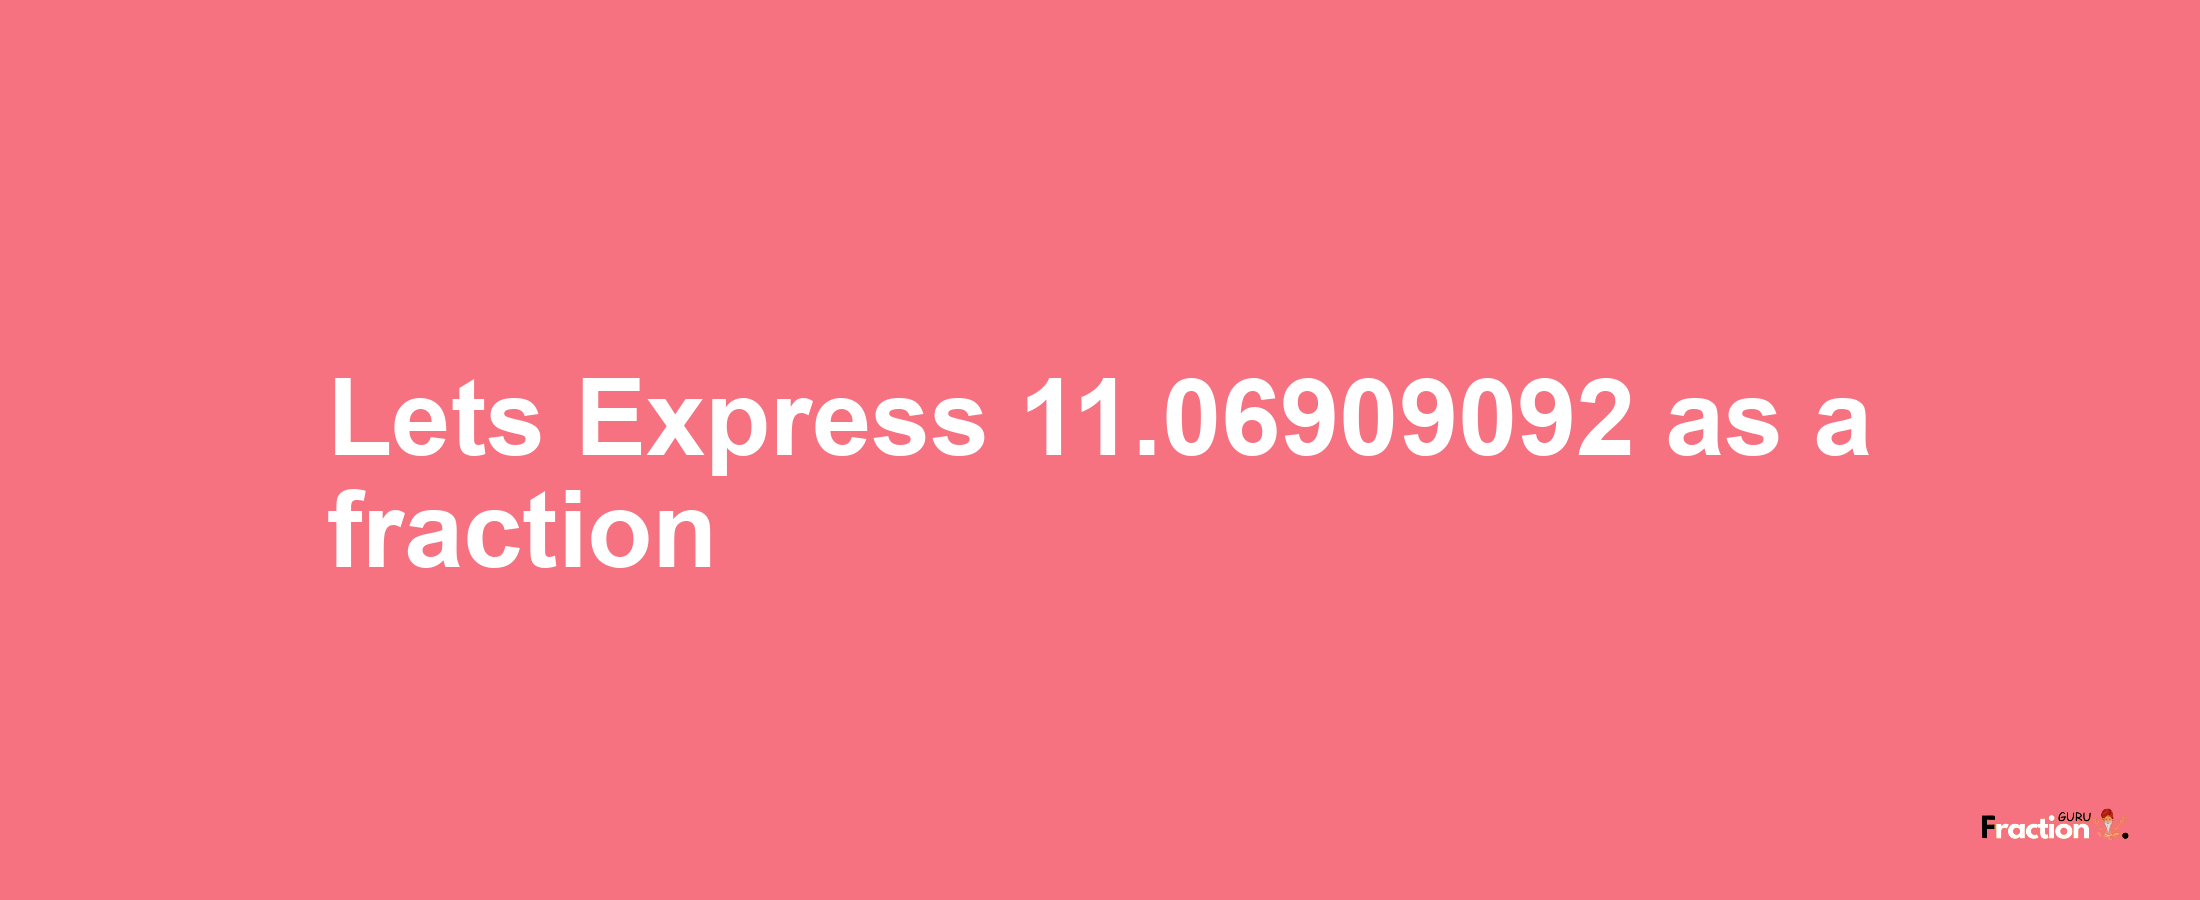 Lets Express 11.06909092 as afraction